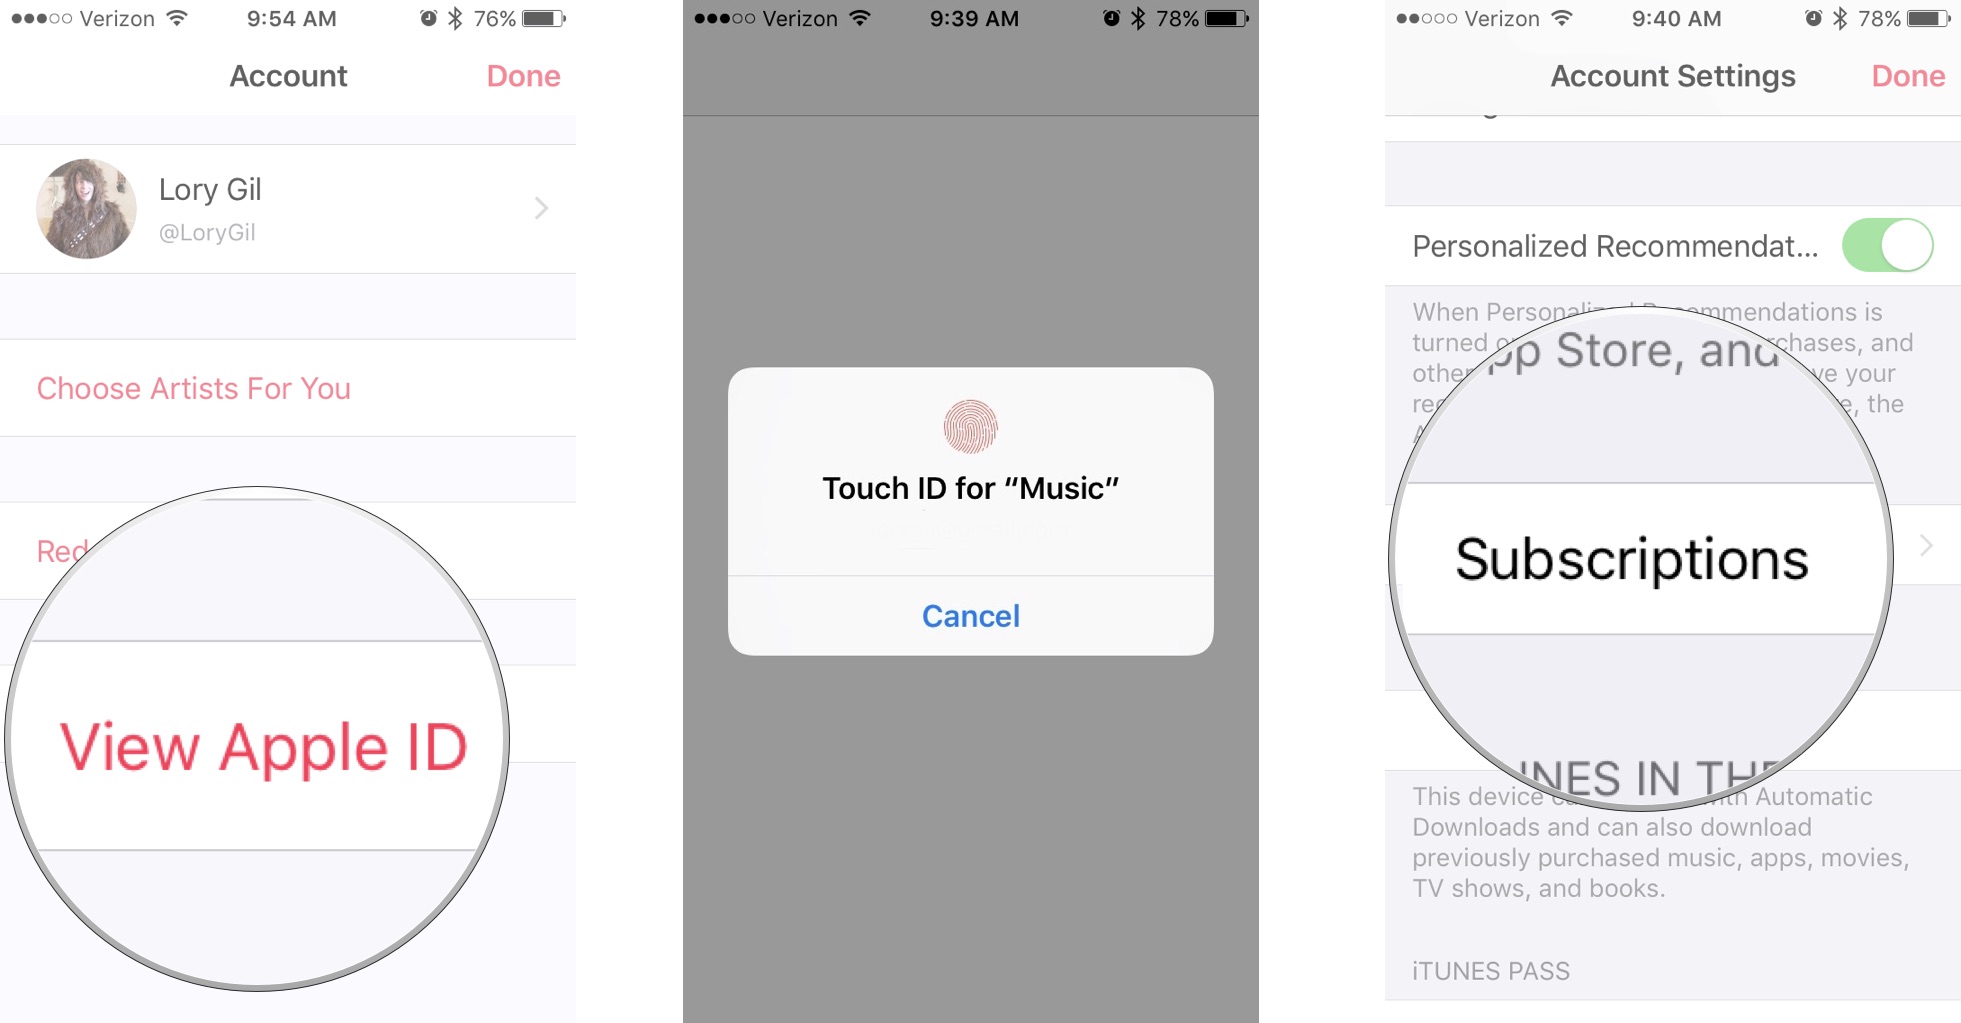 Tap View Apple ID, then enter your Apple ID or Touch ID, then tap Subscriptions